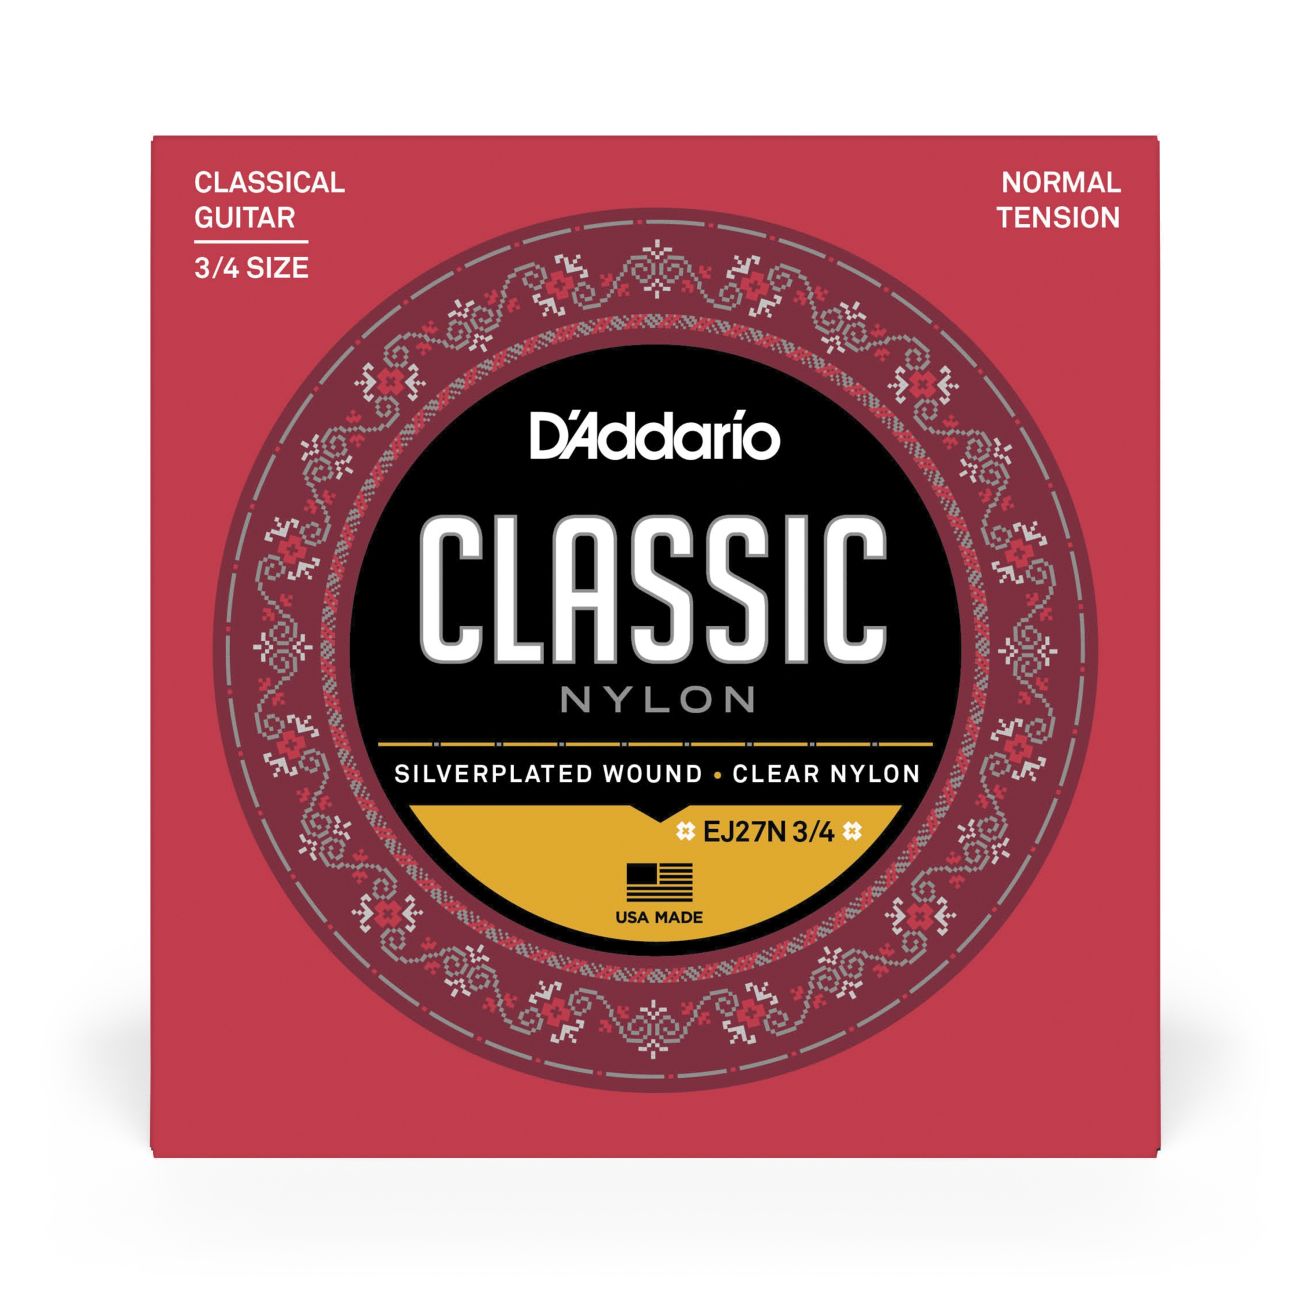 D'Addario EJ27N-3/4 | Classic Nylon Student Classical Guitar Strings | Normal Tension | 3/4 Size